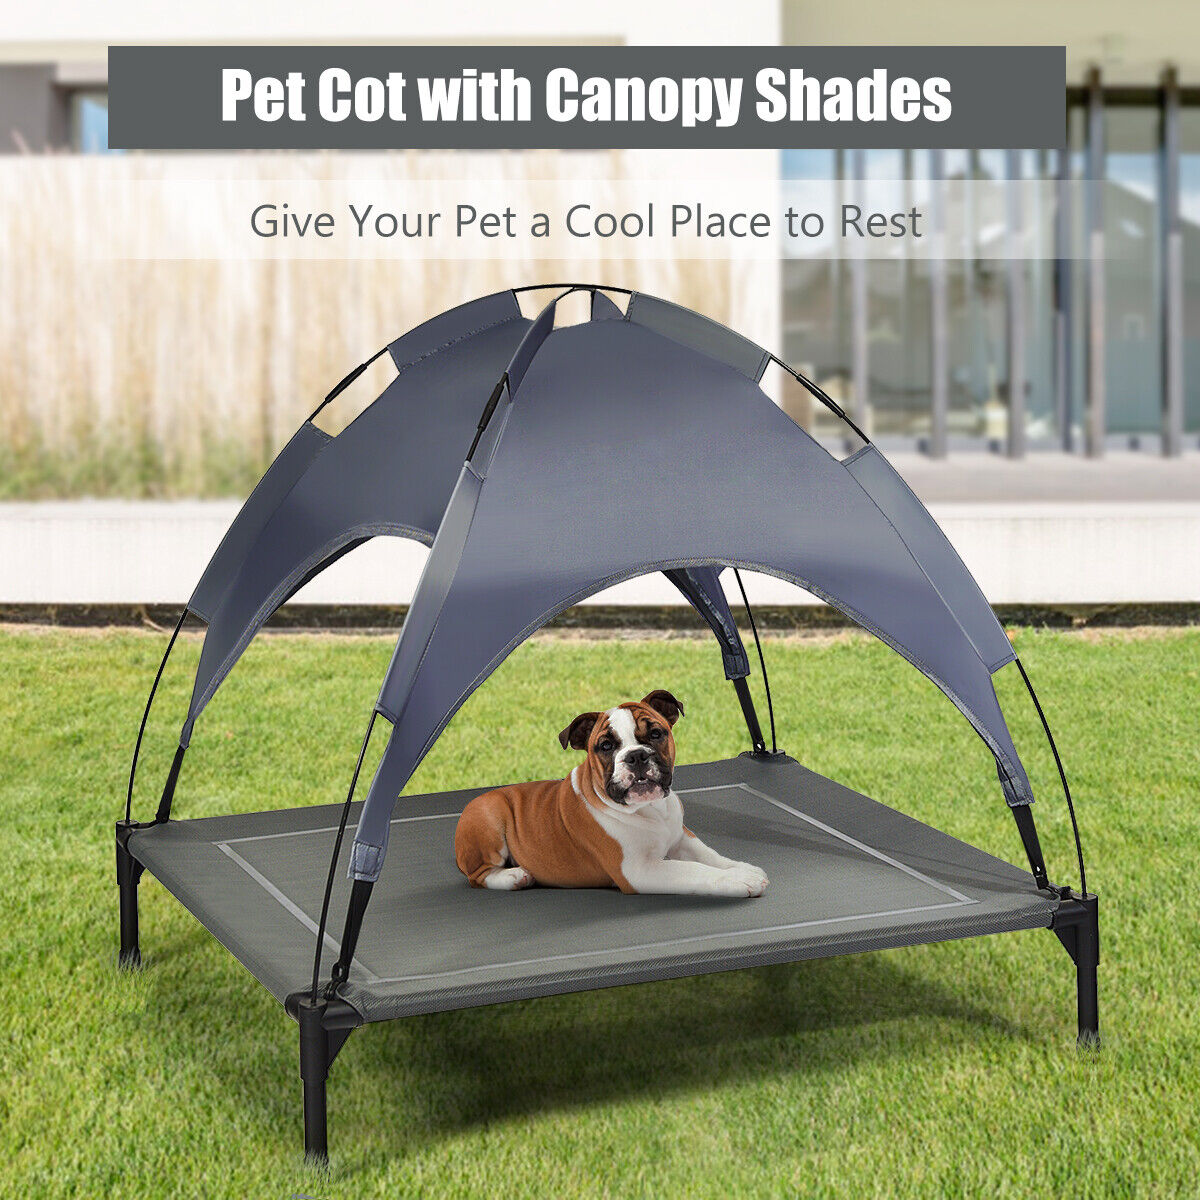 Elevated Dog Cot Portable Outdoor Cooling Pet Bed With Canopy Shade